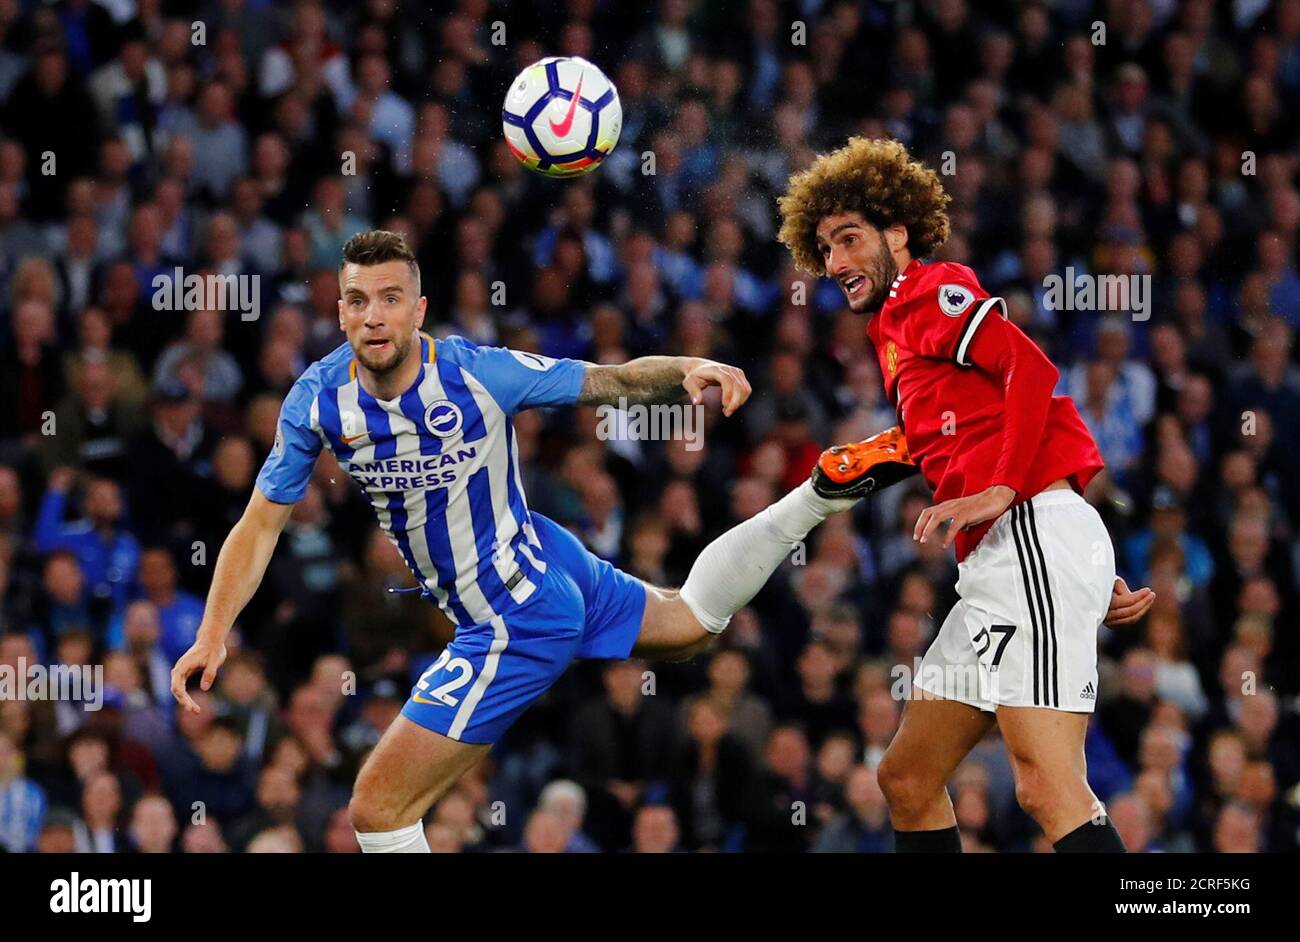 Soccer Football - Premier League - Brighton & Hove Albion v Manchester United - The American Express Community Stadium, Brighton, Britain - May 4, 2018   Manchester United's Marouane Fellaini in action with Brighton's Shane Duffy   REUTERS/Eddie Keogh    EDITORIAL USE ONLY. No use with unauthorized audio, video, data, fixture lists, club/league logos or 'live' services. Online in-match use limited to 75 images, no video emulation. No use in betting, games or single club/league/player publications.  Please contact your account representative for further details. Stock Photo